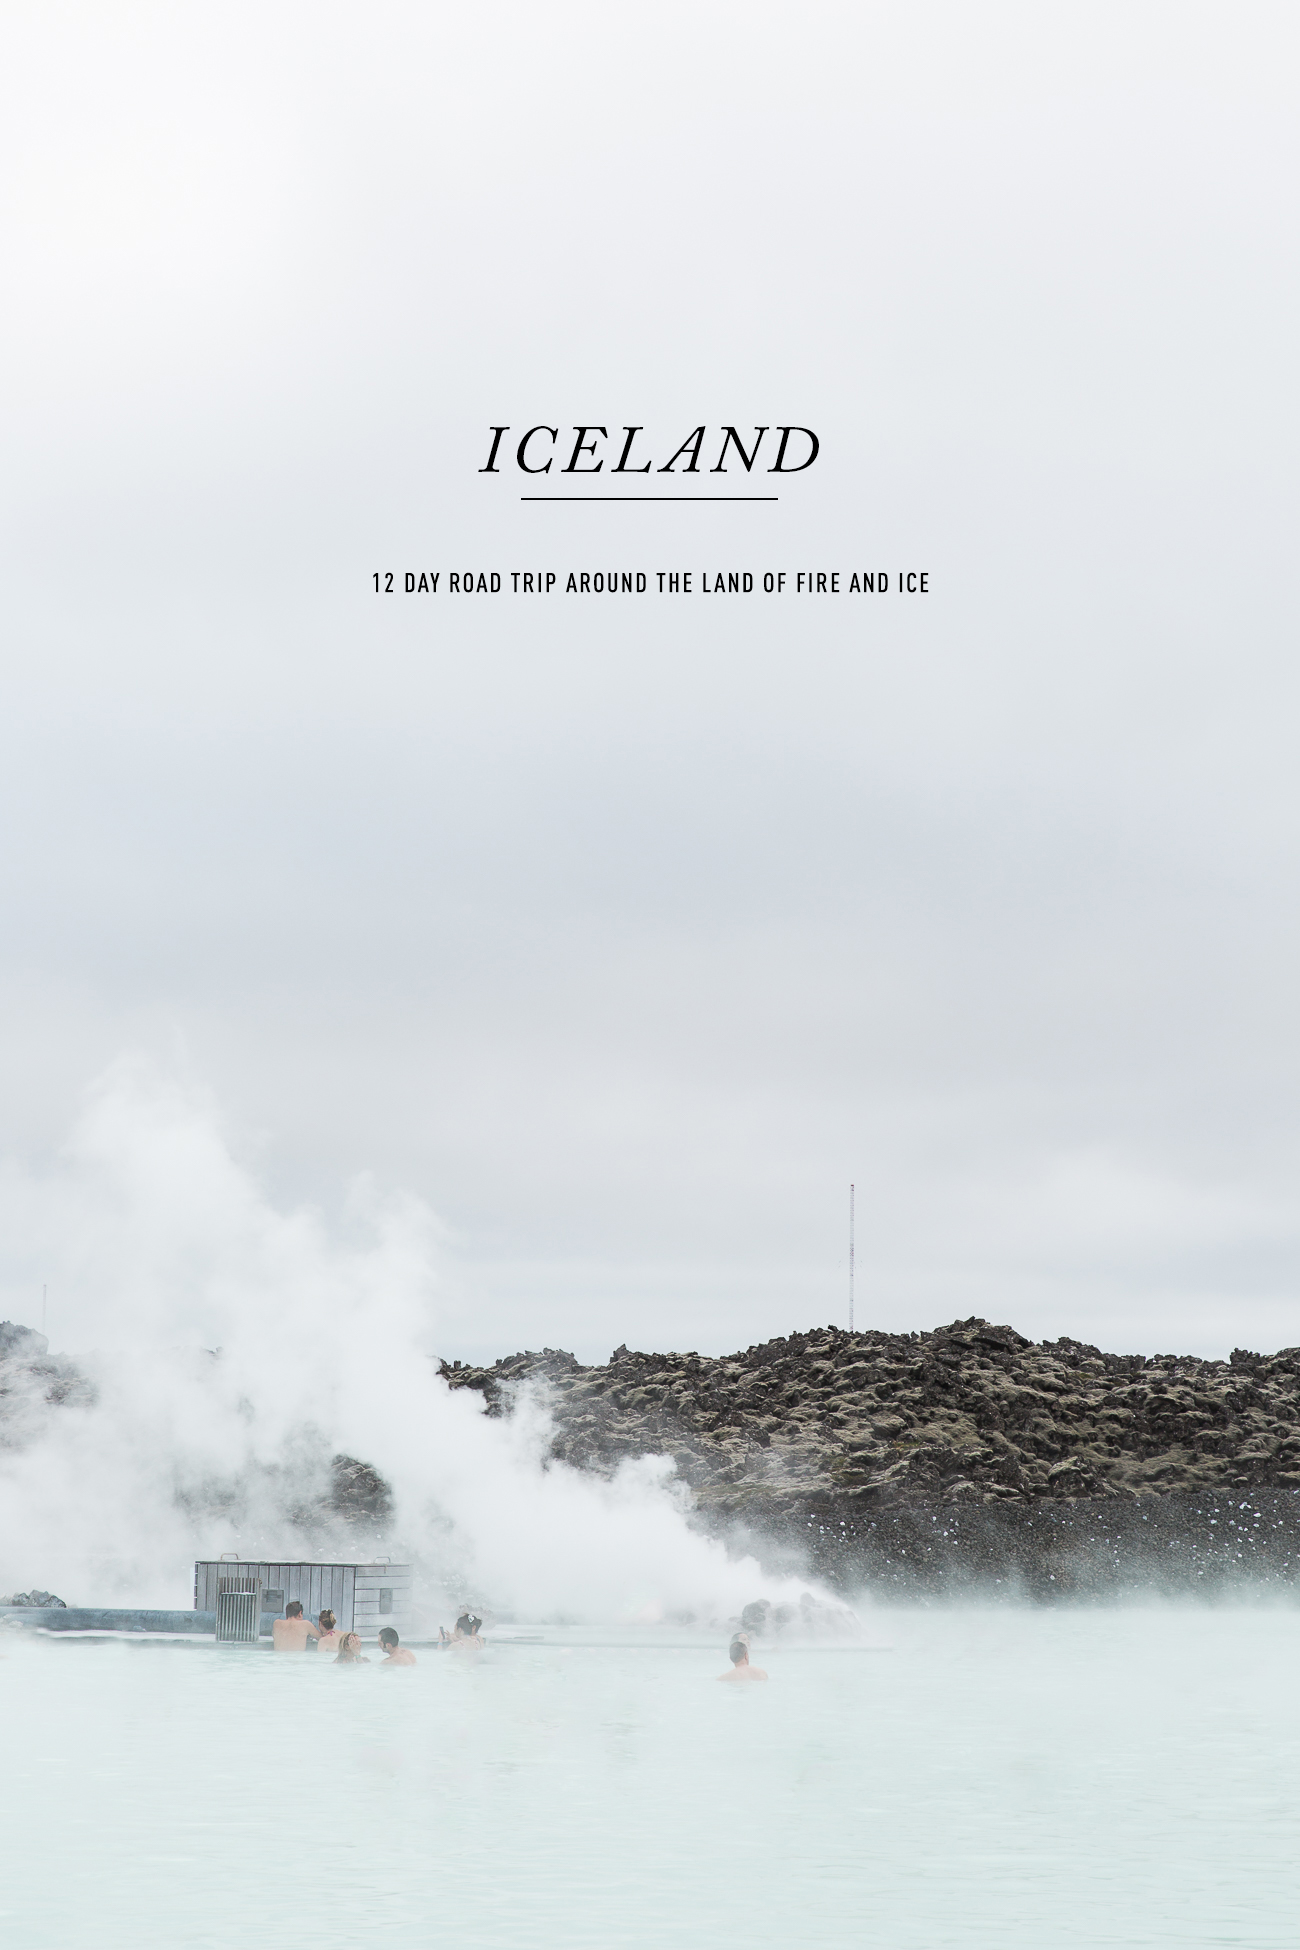 Iceland - Around the Ring Road / See and Savour